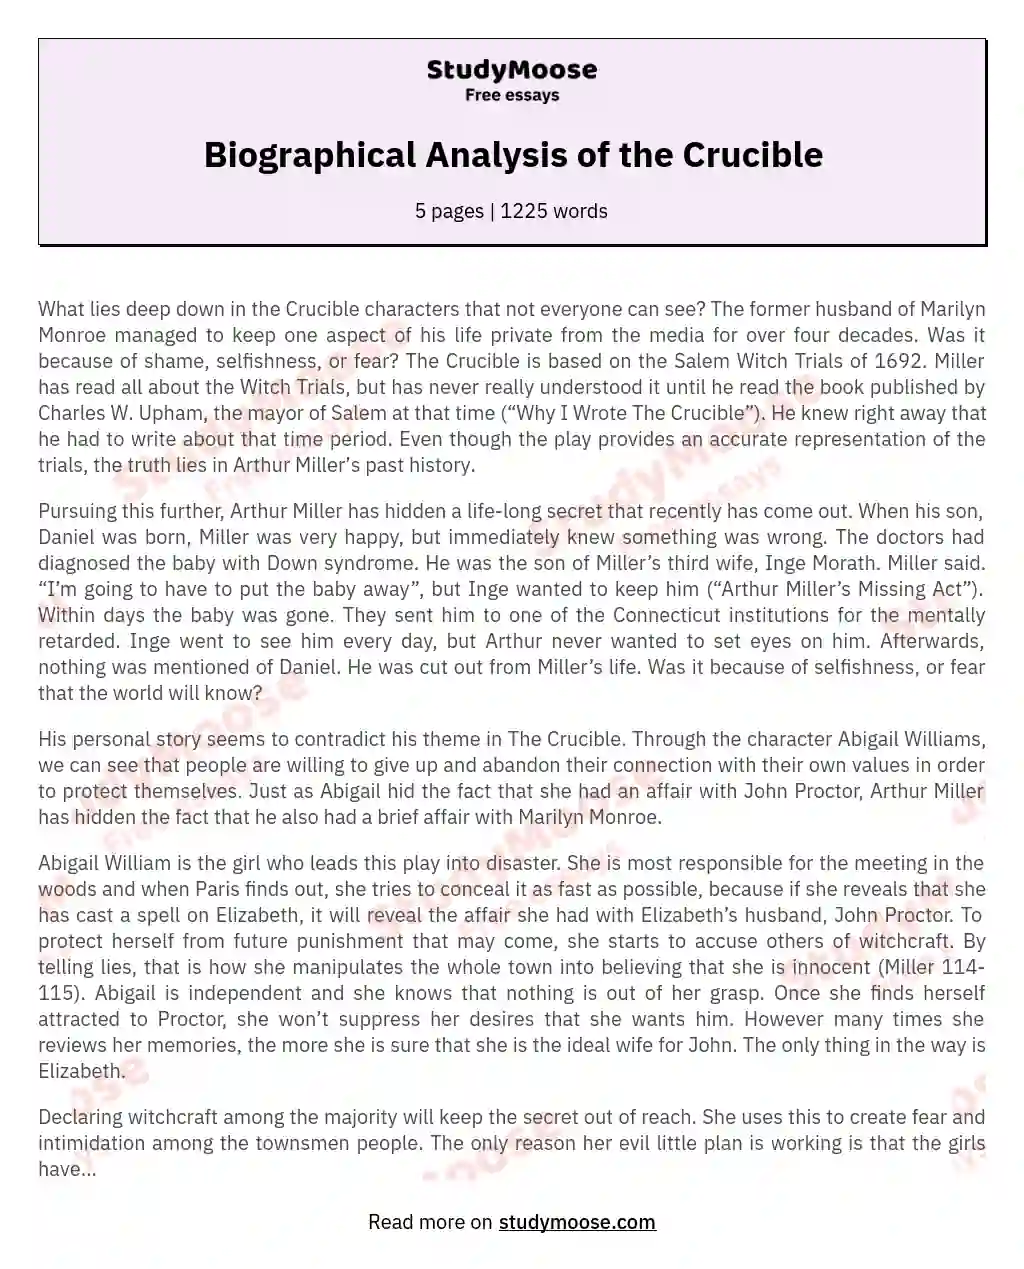 Biographical Analysis of the Crucible essay